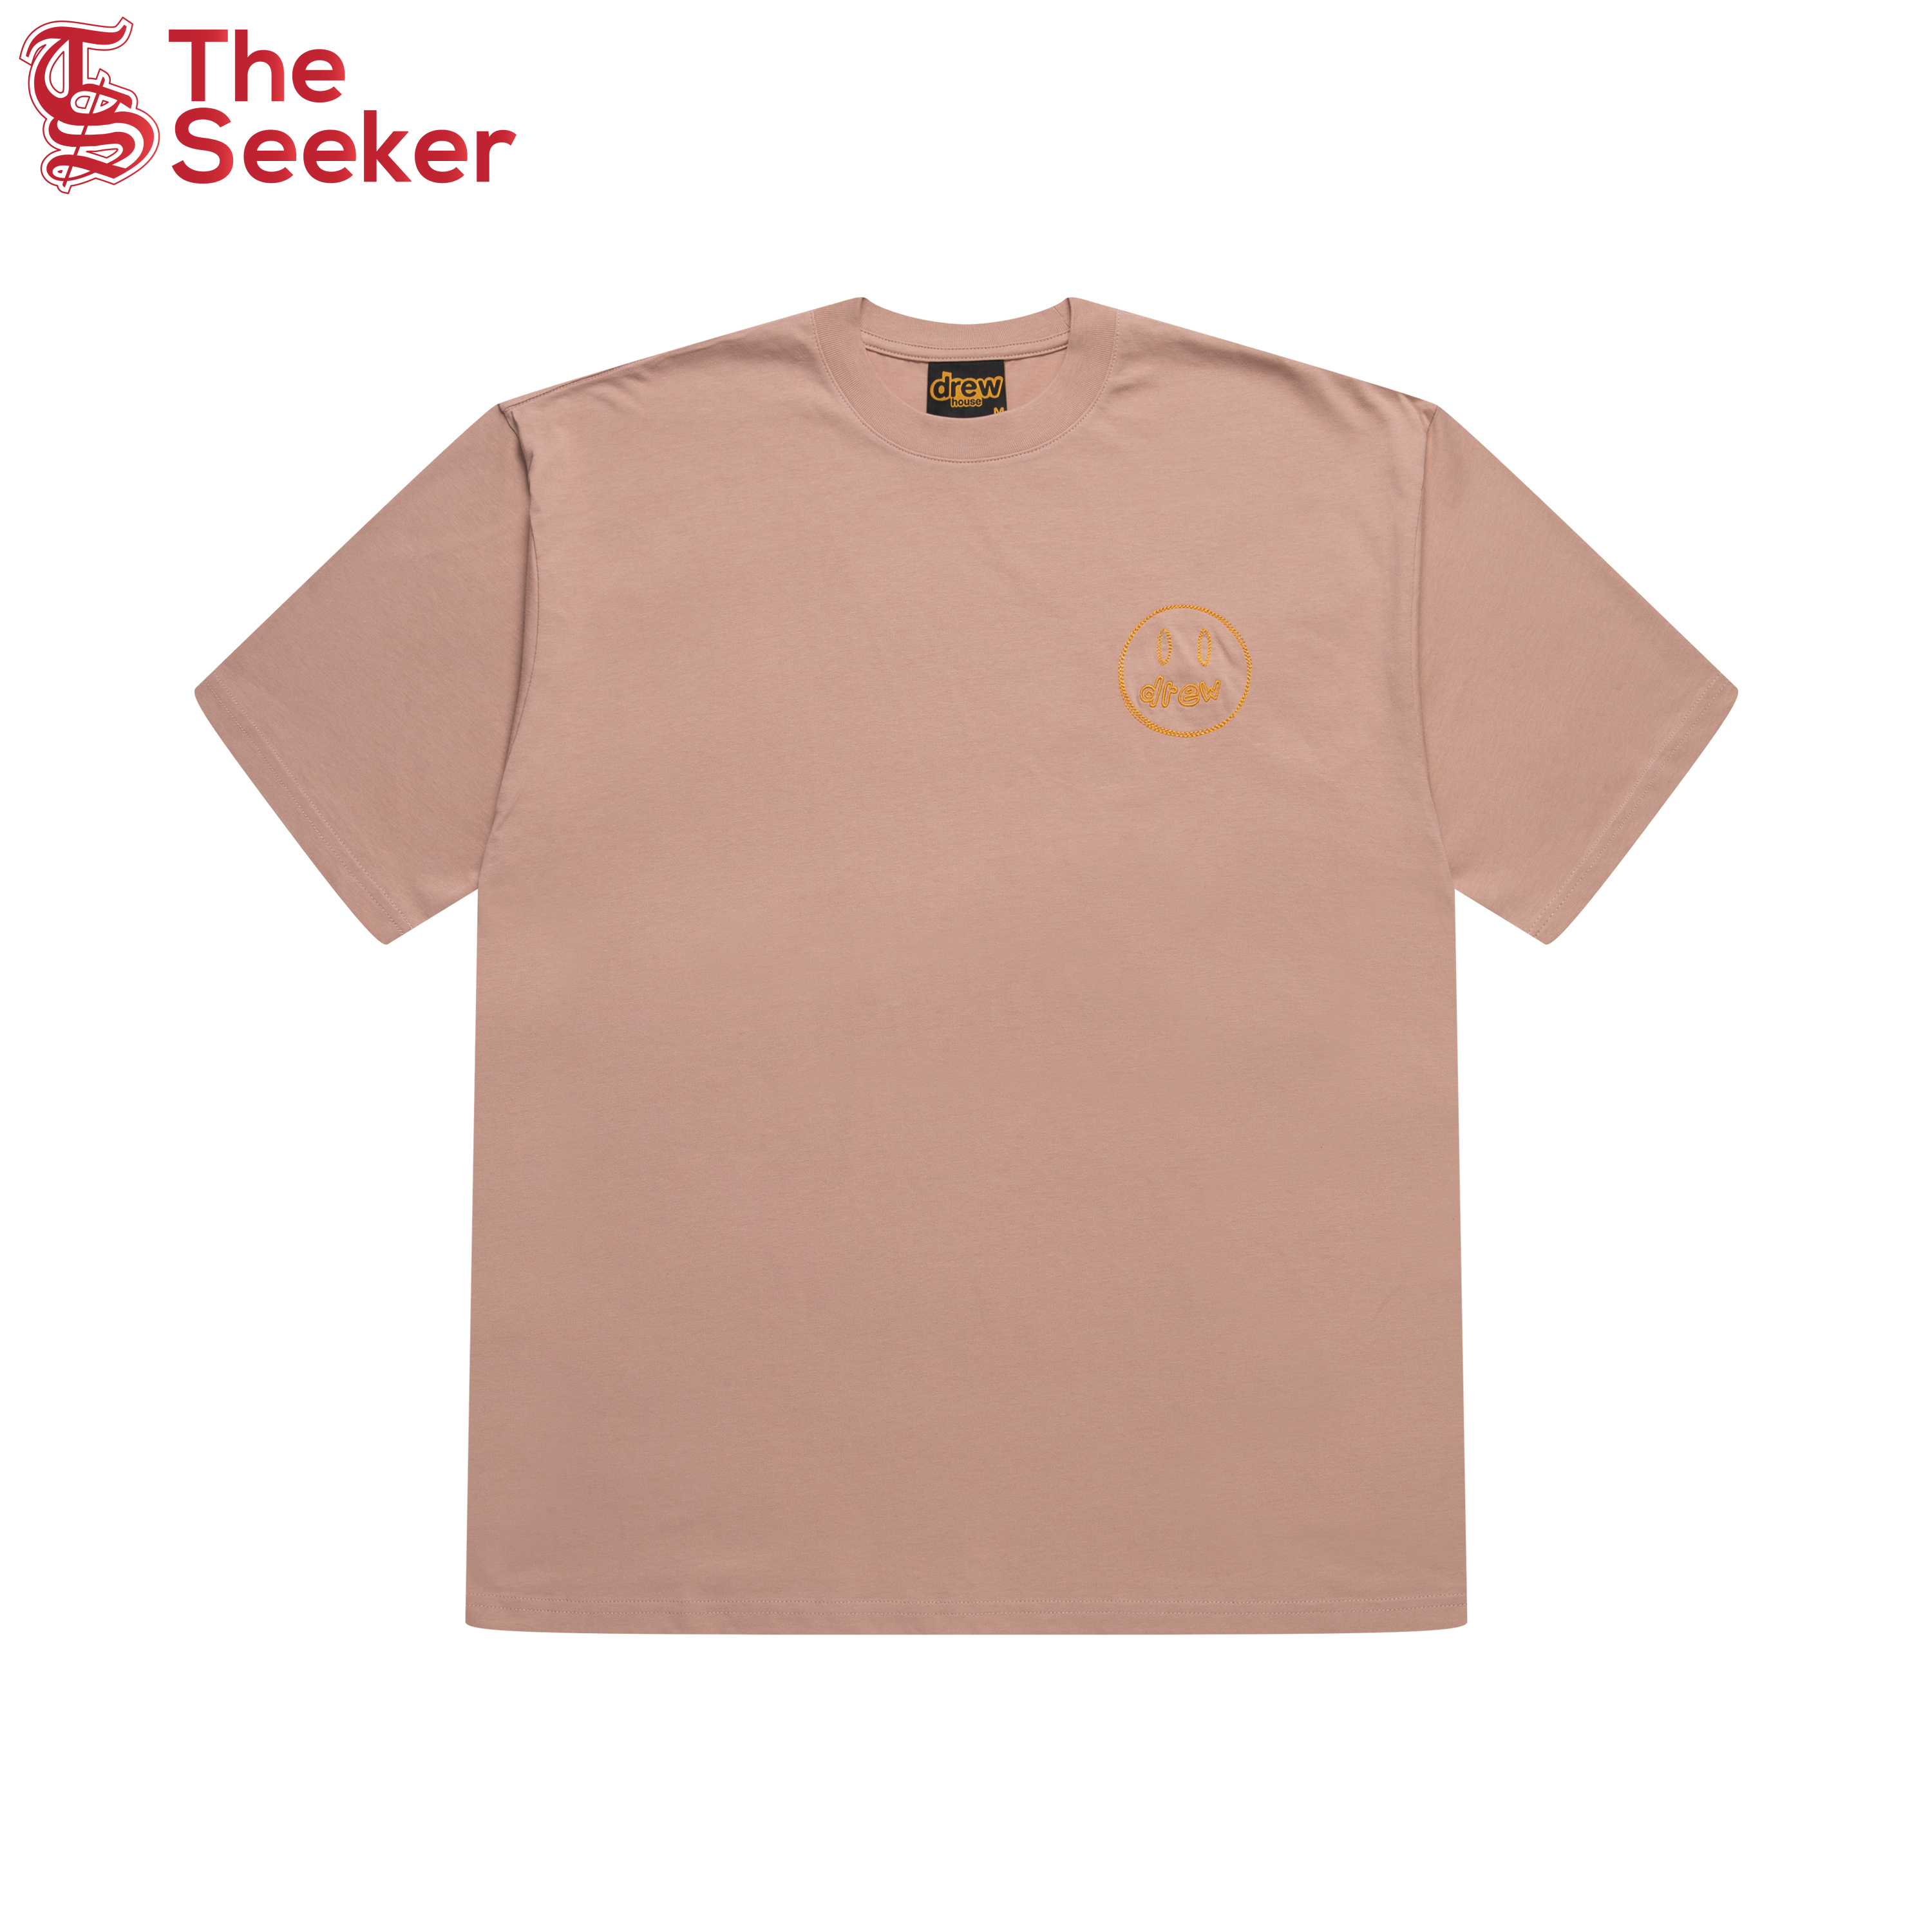 drew house sketch mascot embroidery t-shirt dusty rose